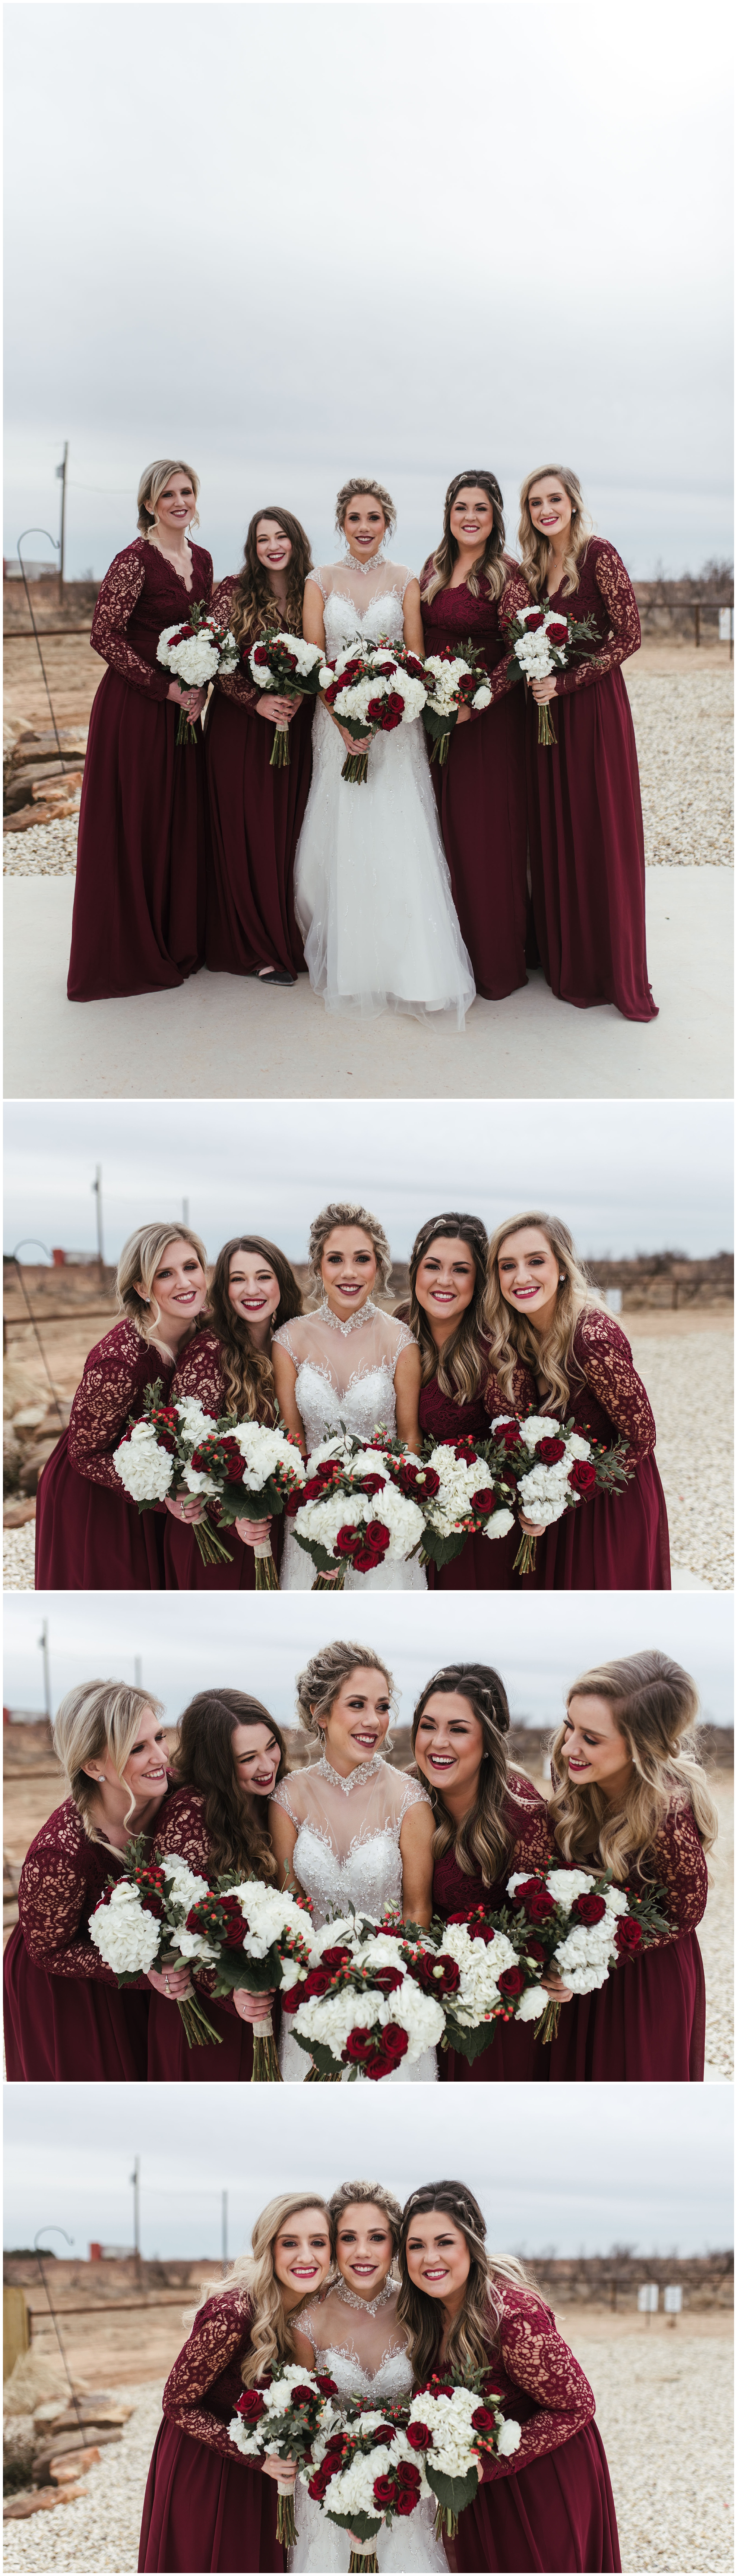  Twin Lakes Wedding and Event Center | Ropesville, TX | Lubbock Wedding | Fort Worth Wedding Photographer | www.jordanmitchellphotography.com 